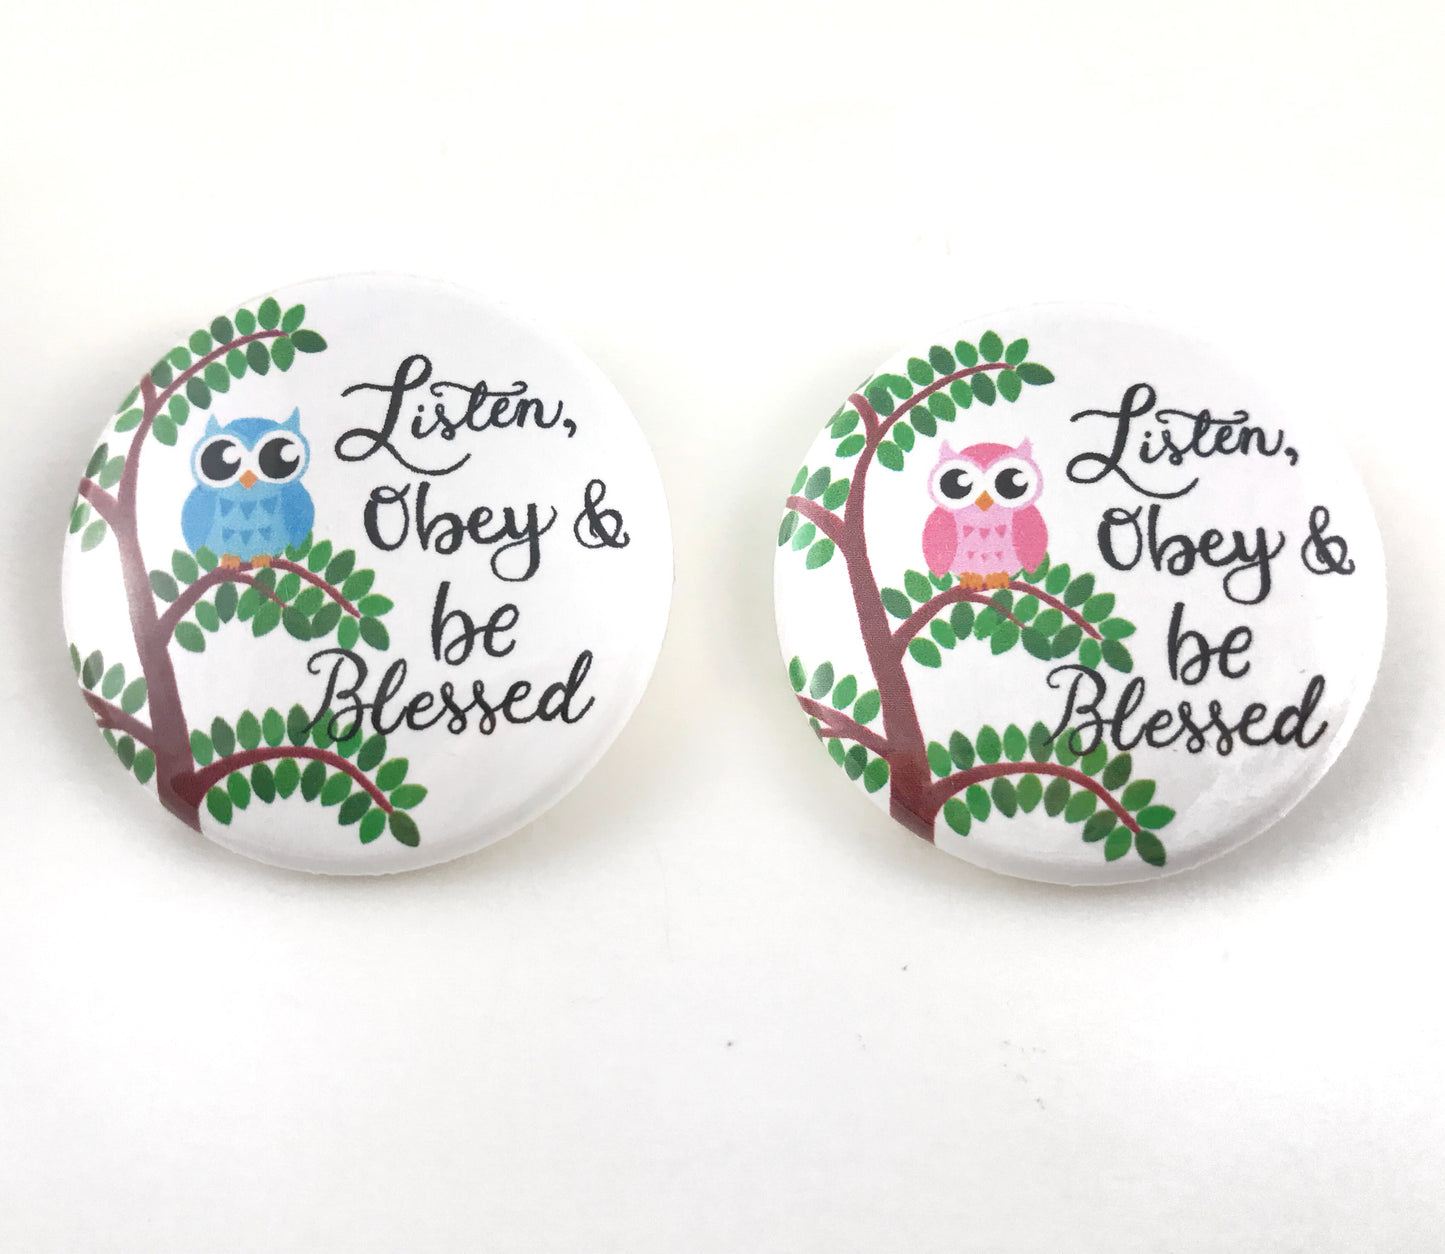 Listen, Obey & Be Blessed JW pins for kids by Olive Branch Design Studio